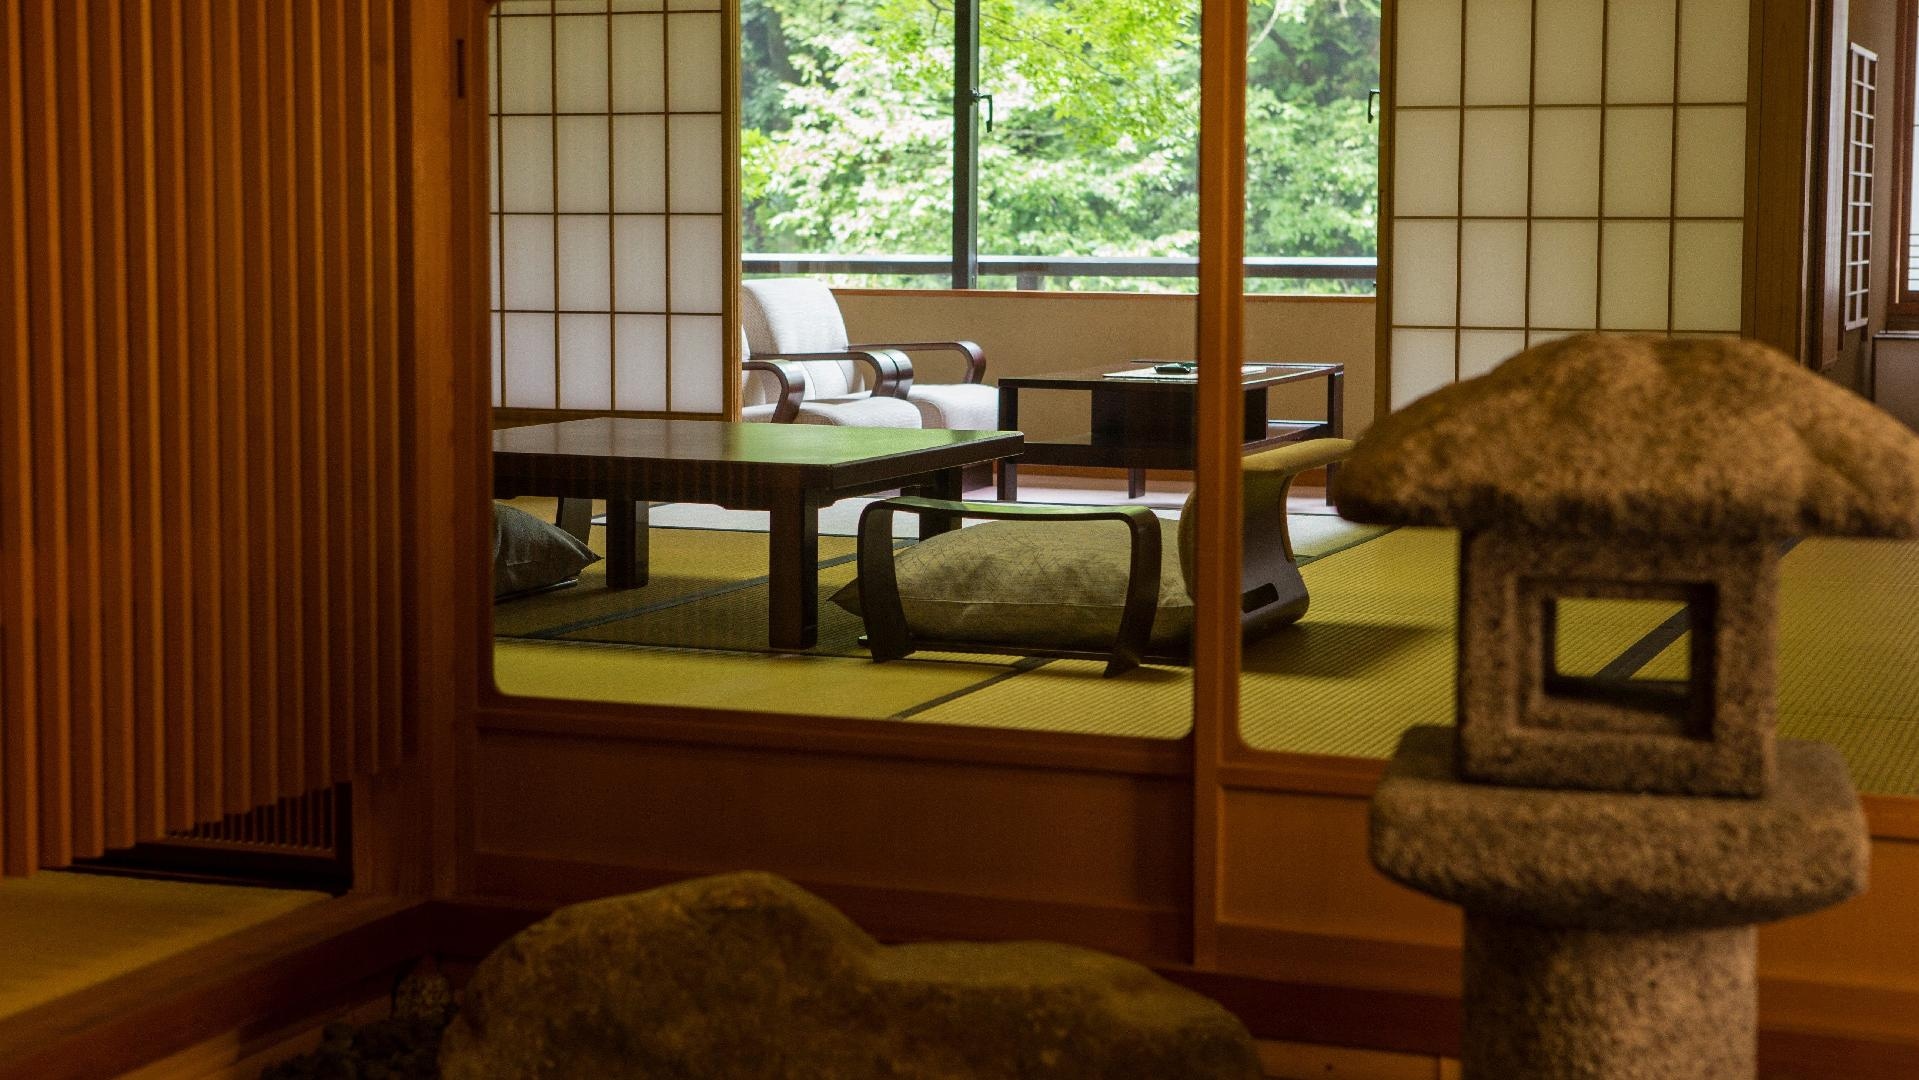 An example of a guest room with a tsubo garden